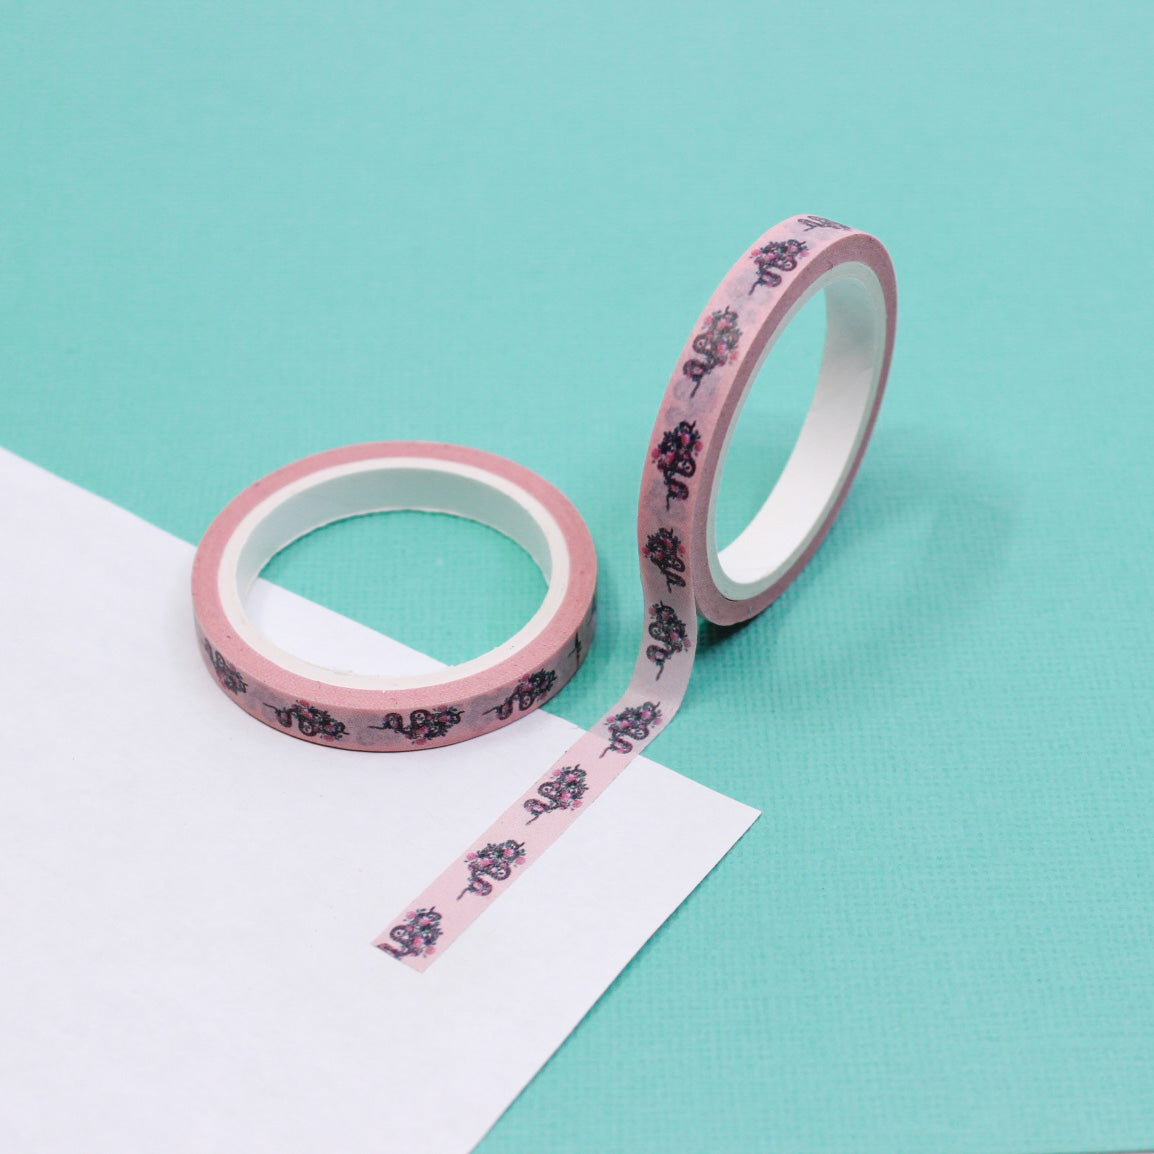 Infuse your creations with a fusion of tattoo-inspired artistry using our washi tape adorned with pink snakes and intricate floral patterns, creating a unique and captivating accent for your crafts. This tape is sold at BBB Supplies Craft Shop.